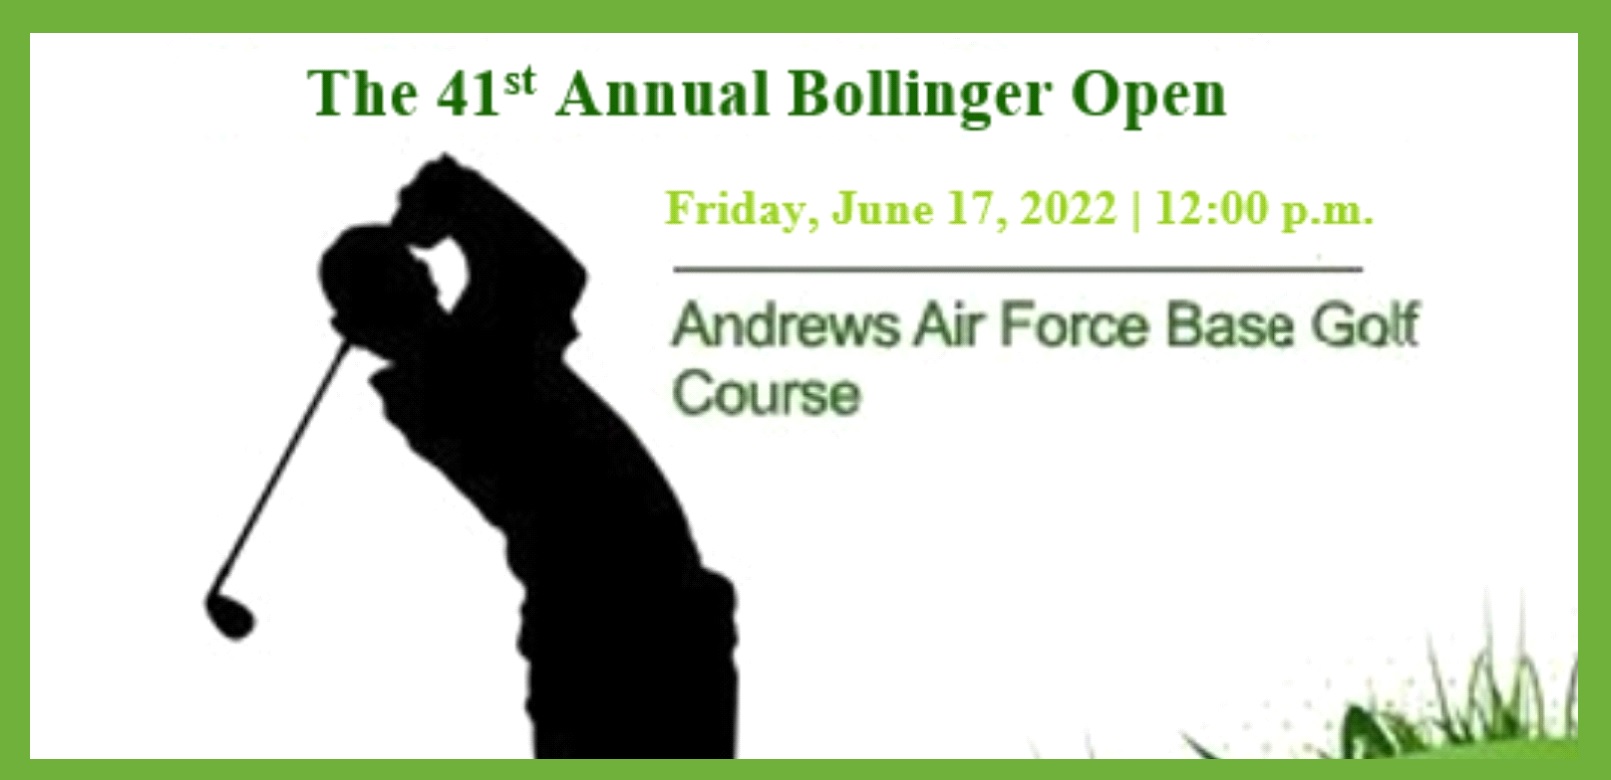 The 41st Annual Bollinger Open